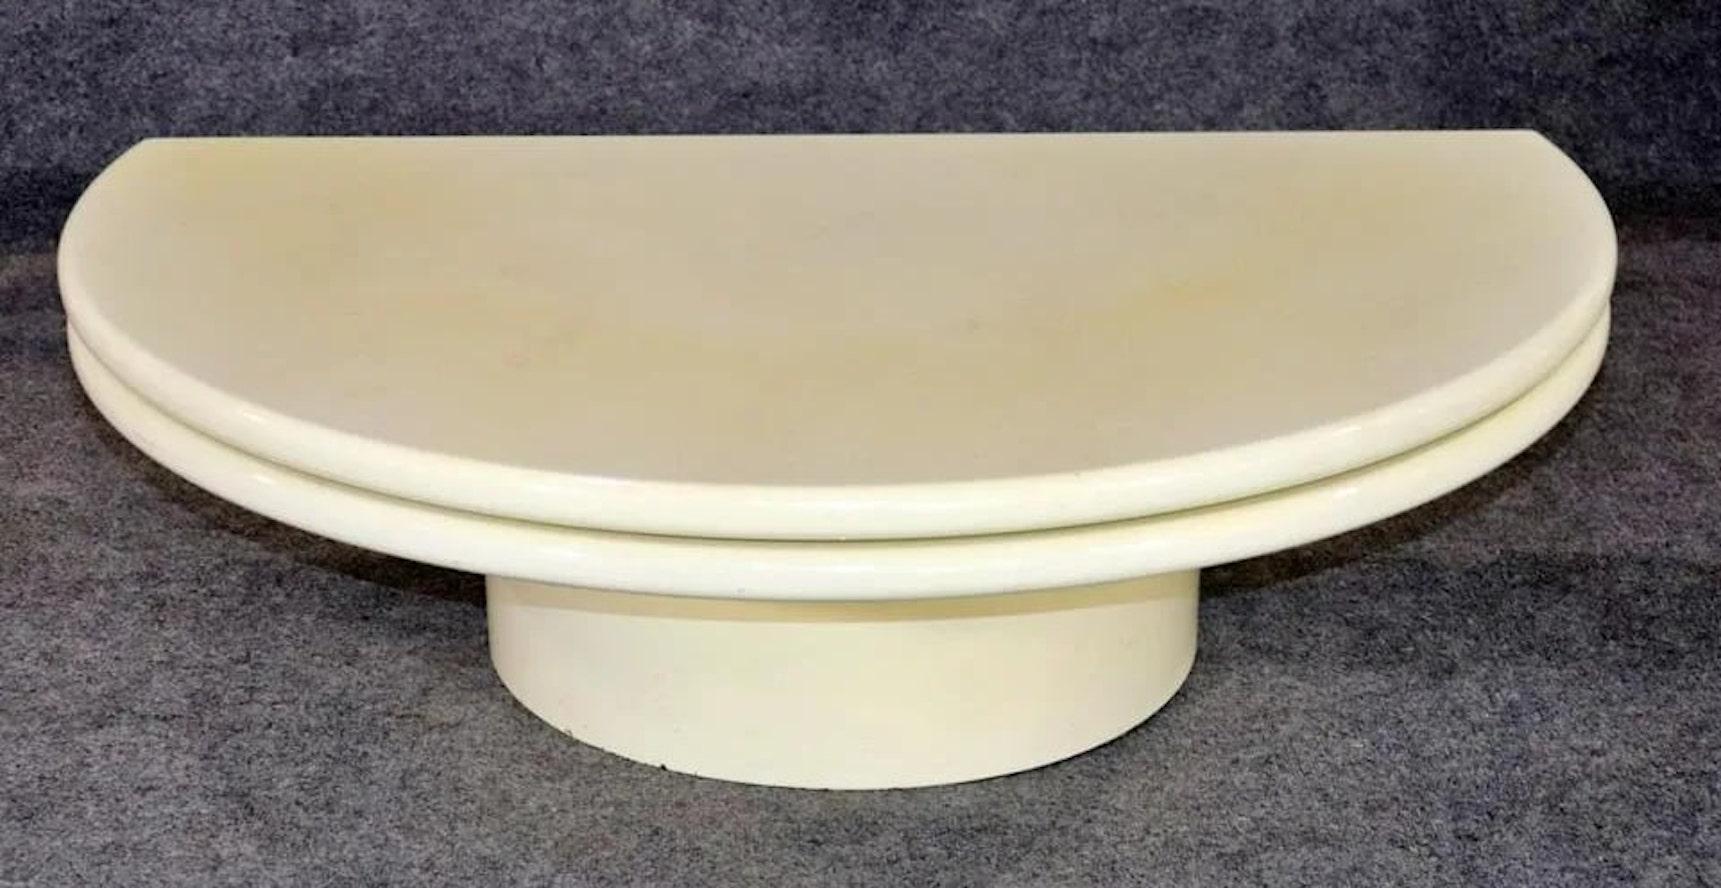 Mid-century modern round coffee table with a revolving top that closes to a half moon shape. Great for use as a lazy Susan at parties.
Please confirm location NY or NJ